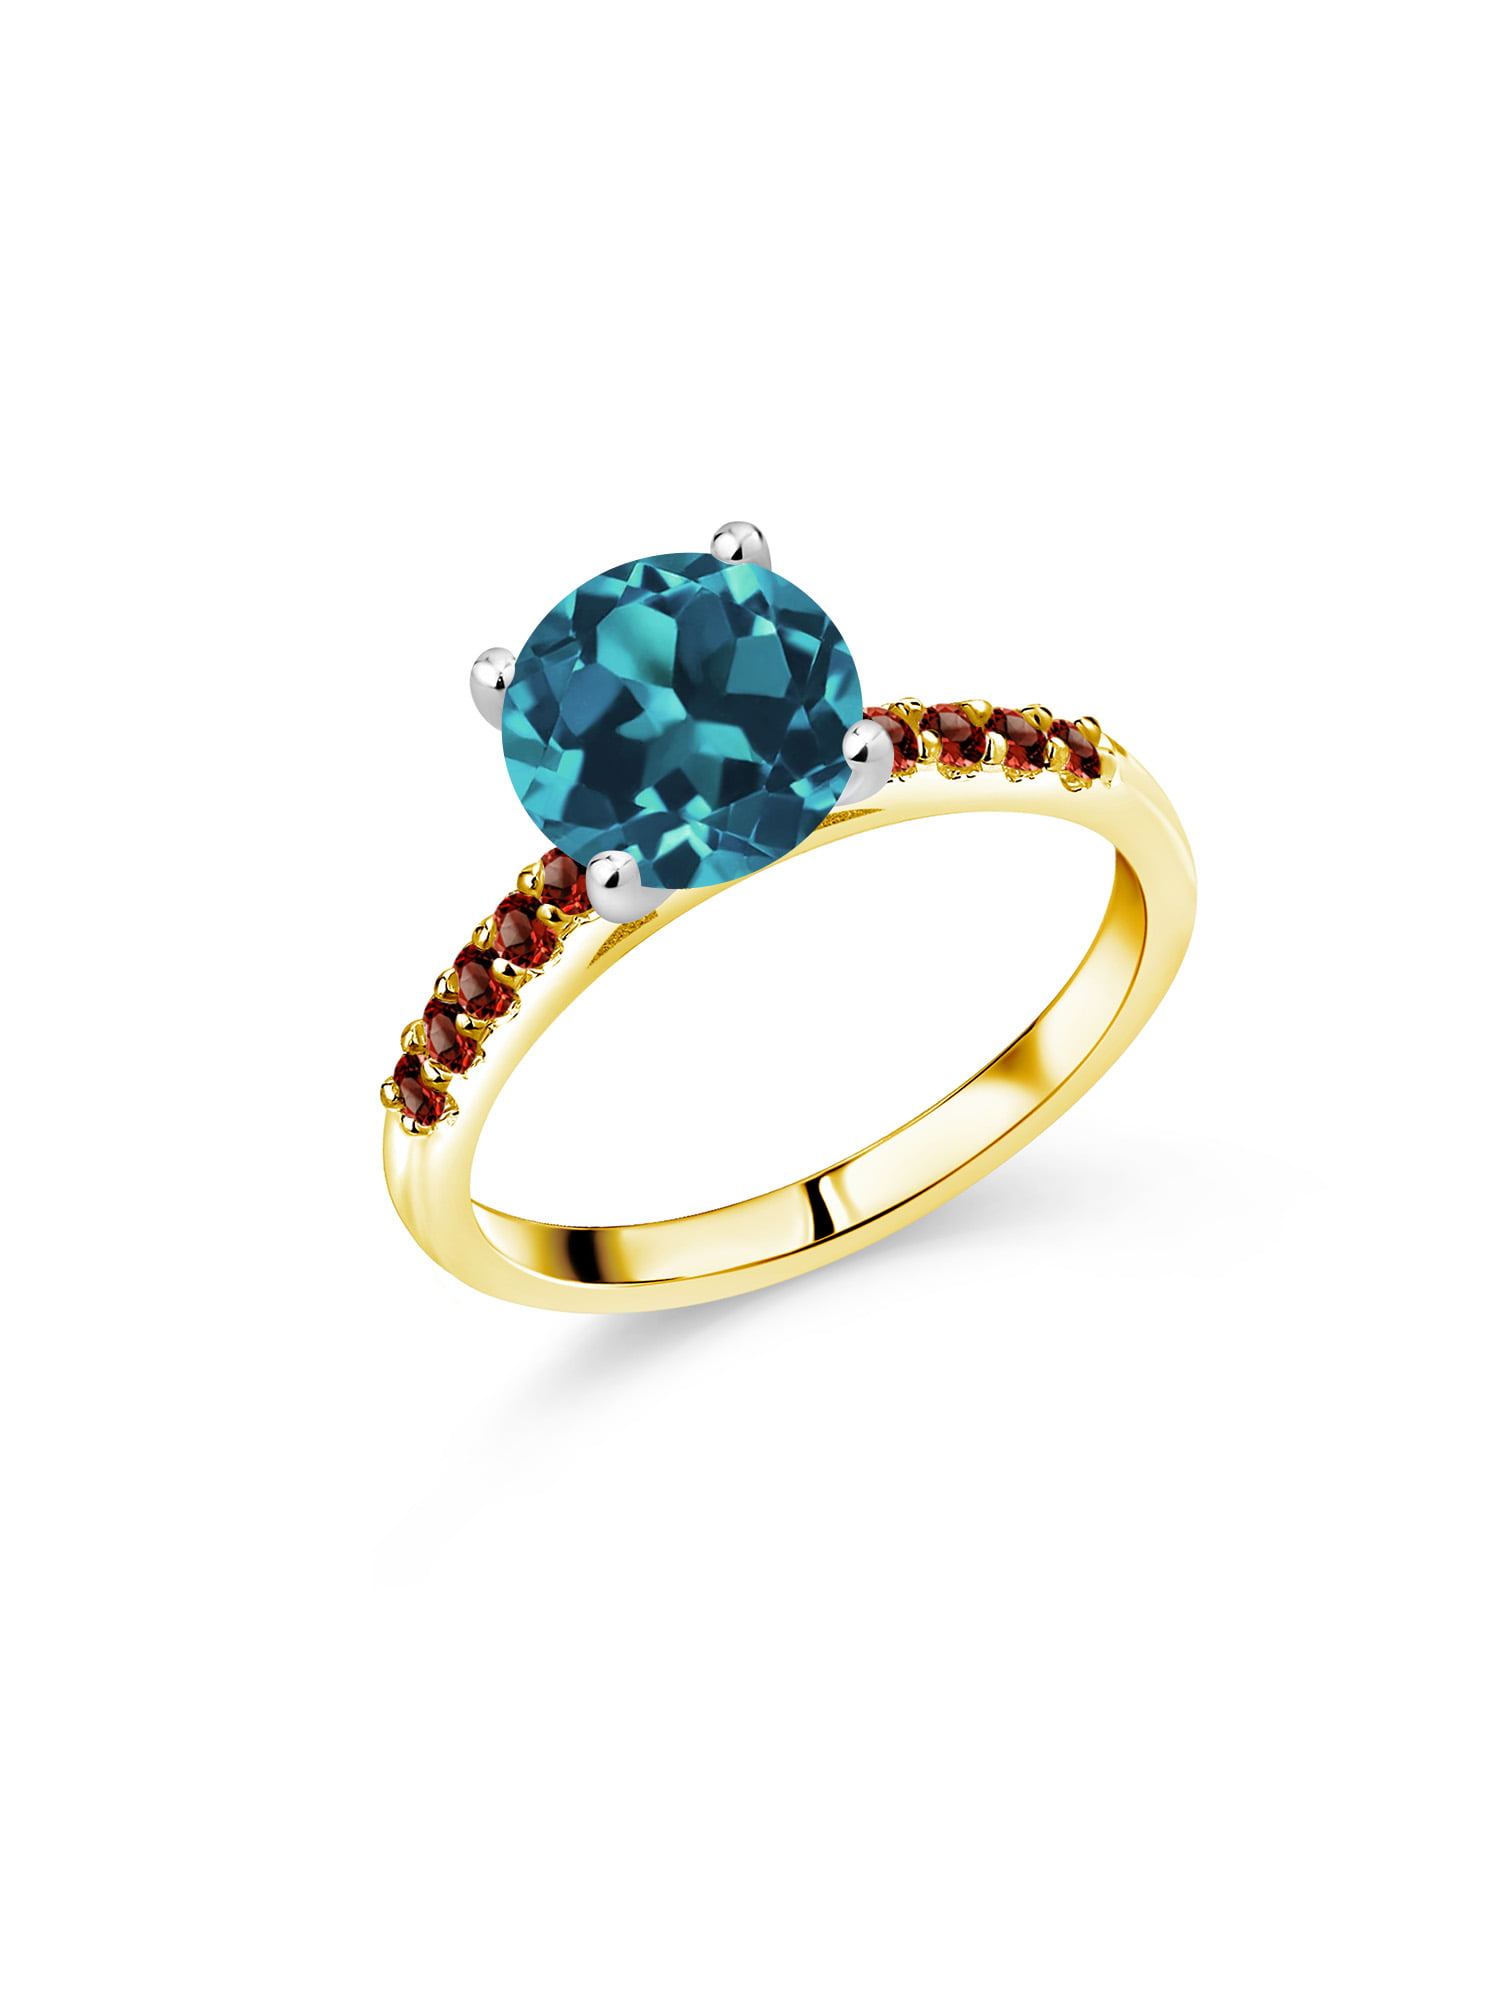 Gem Stone King 1.40 Ct Round London Blue Topaz 18K Yellow Gold Plated Silver Anniversary Ring